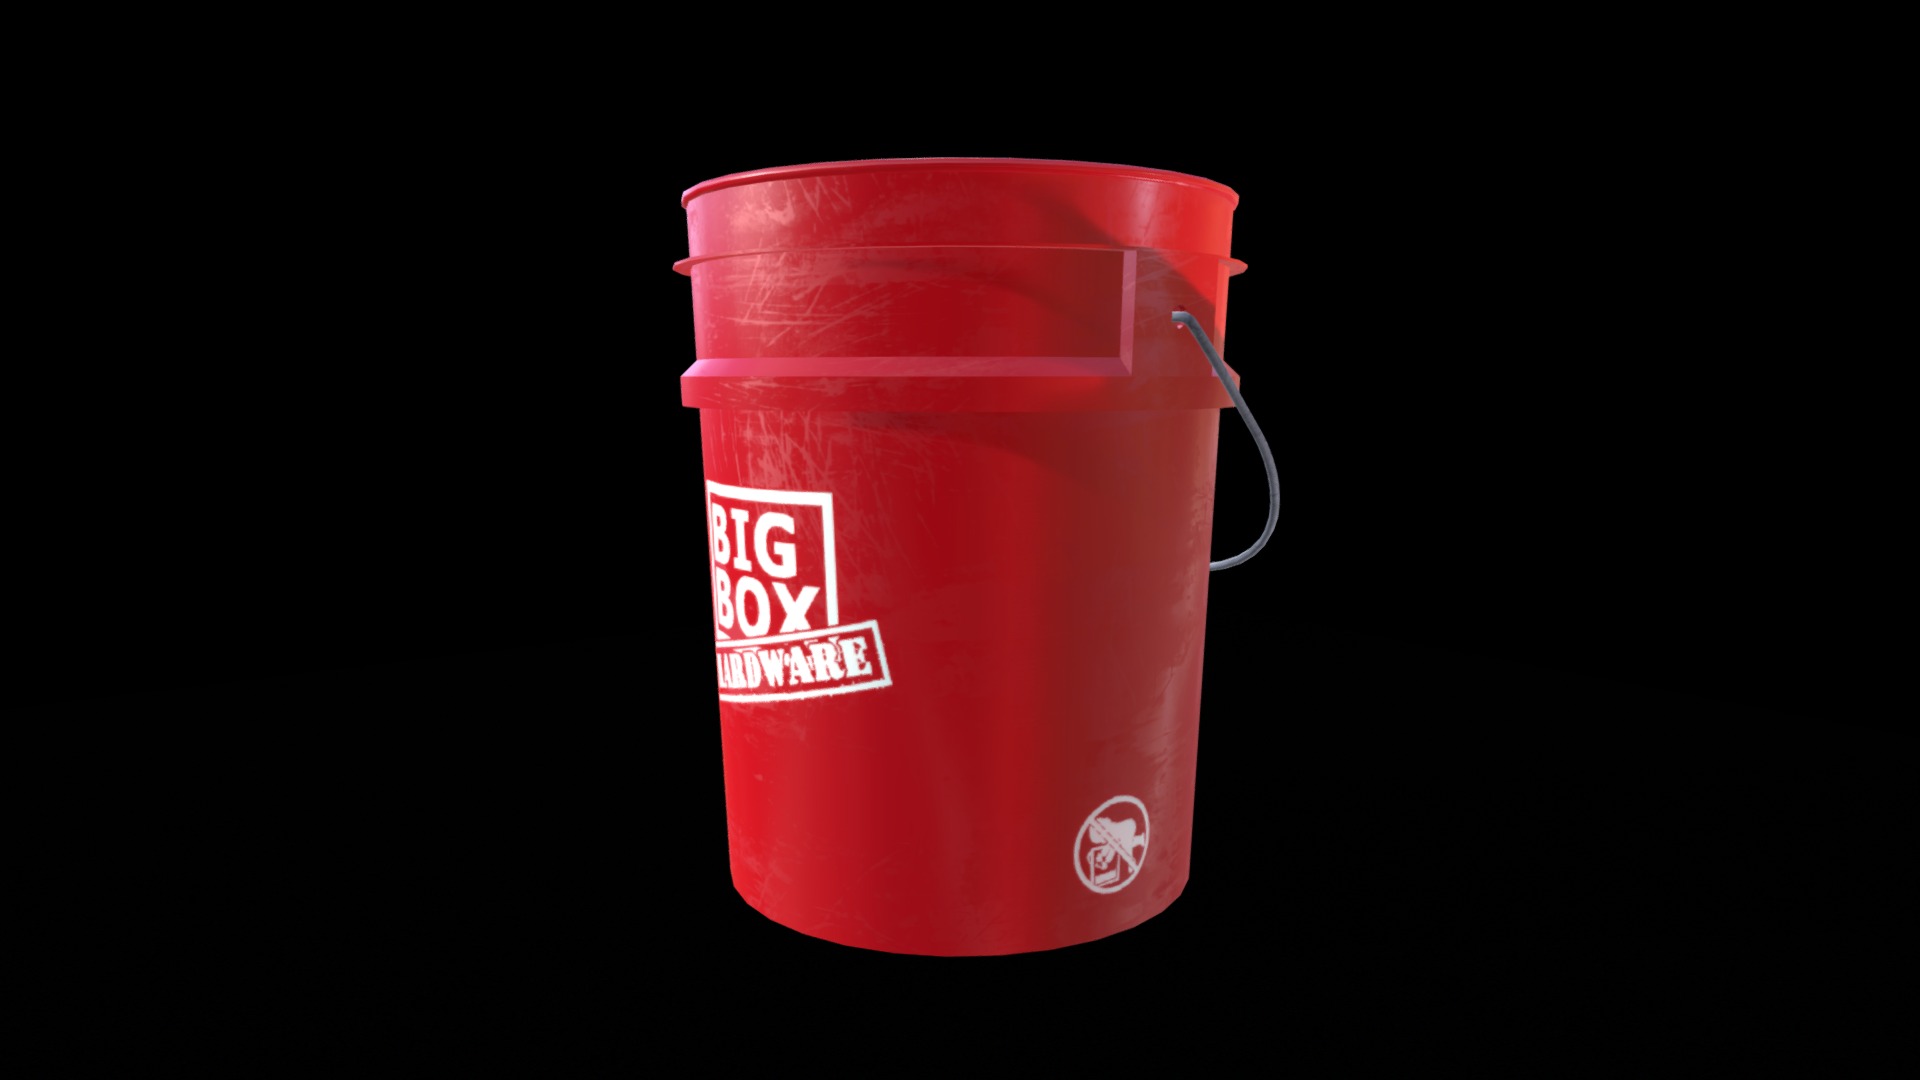 3D model 5 Gallon Bucket - This is a 3D model of the 5 Gallon Bucket. The 3D model is about a red plastic container.